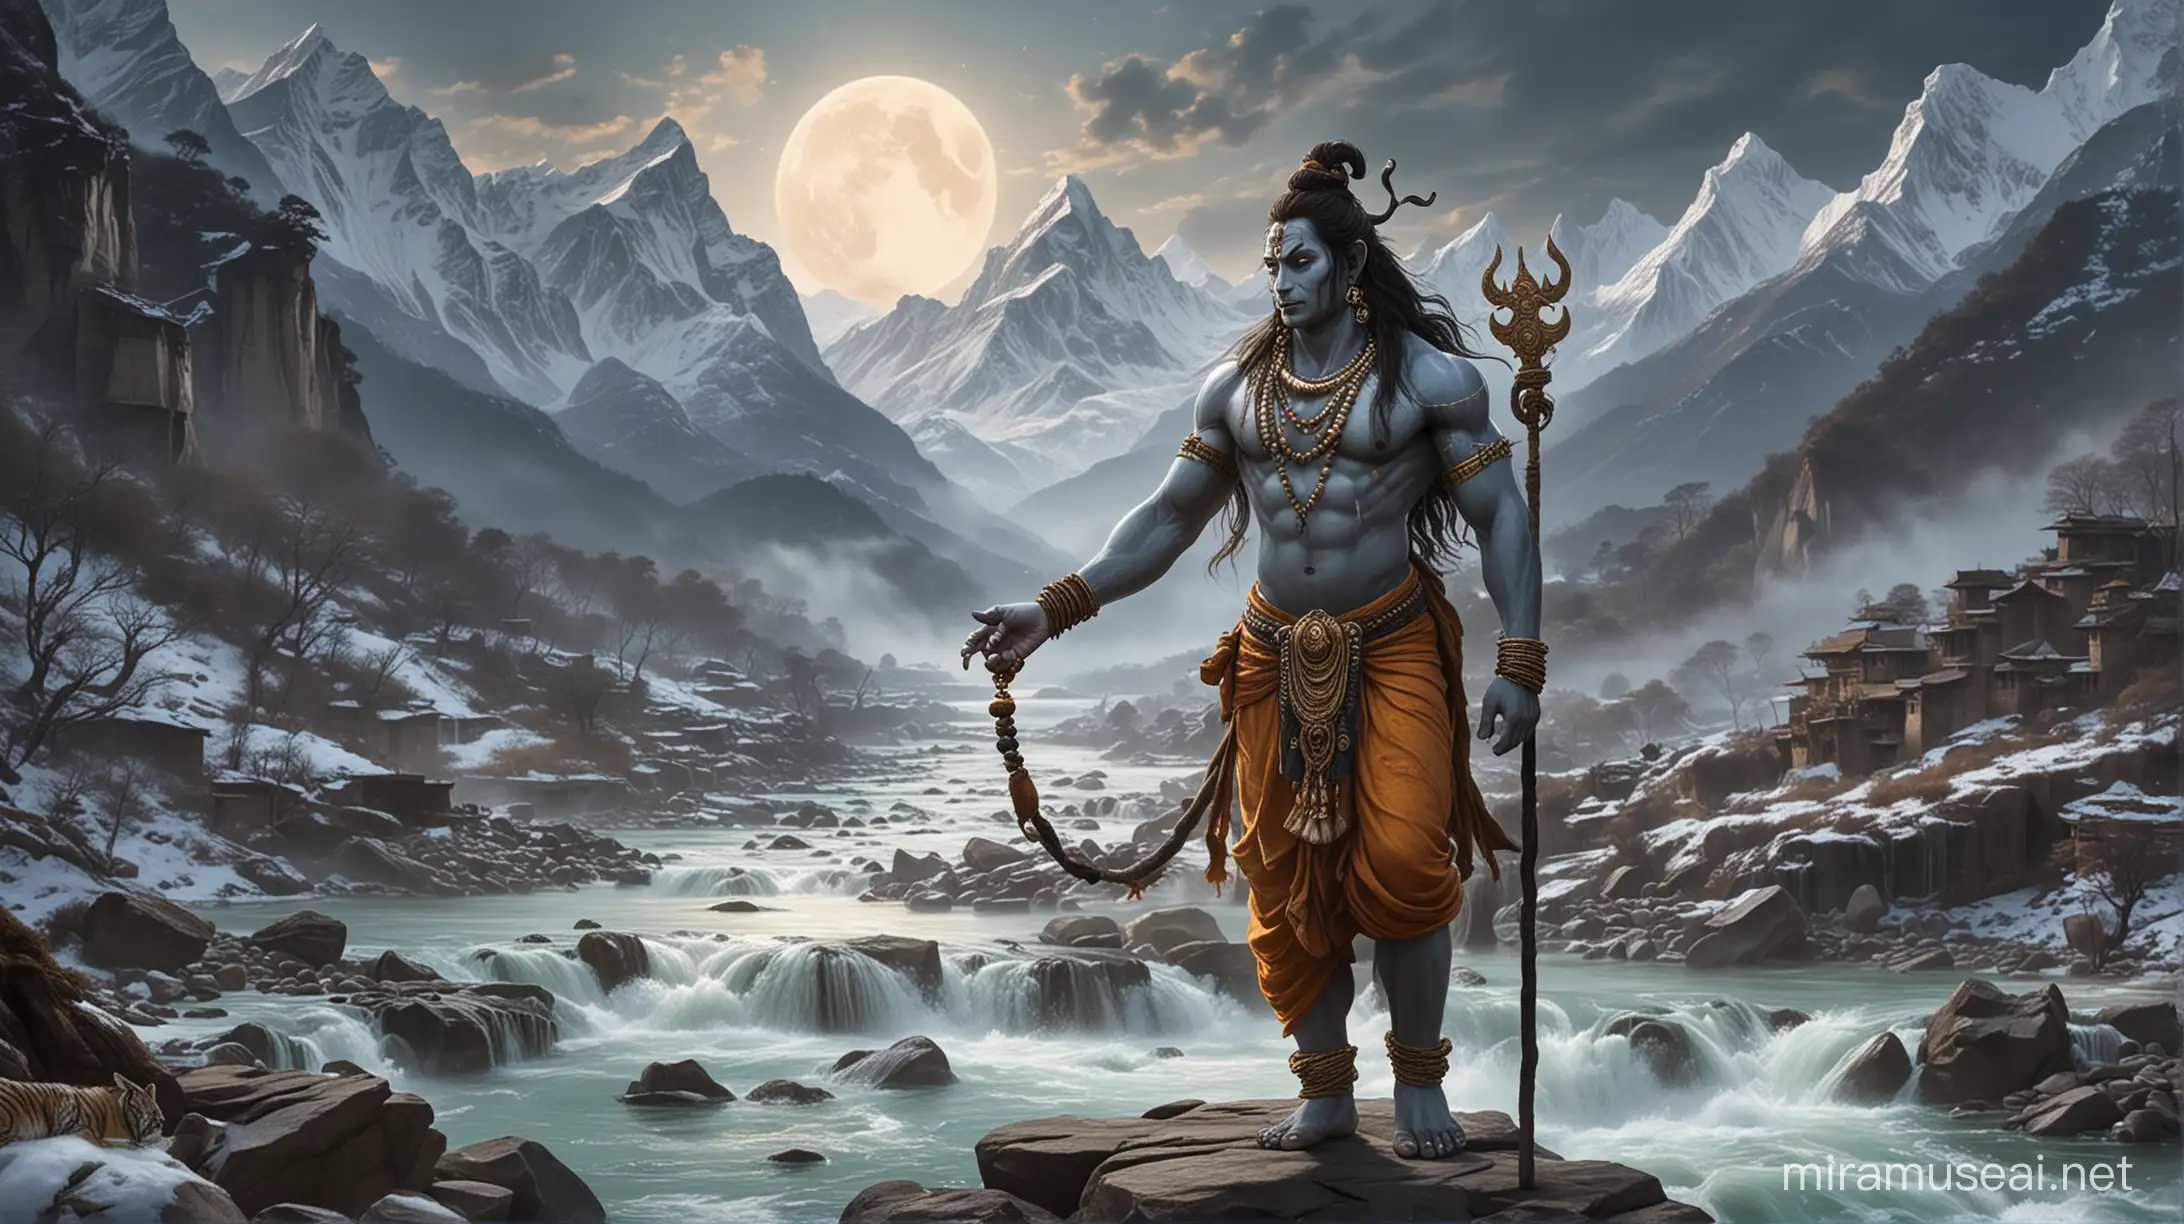 Lord Shiva Standing Triumphantly on Demon Amidst Himalayan Serenity